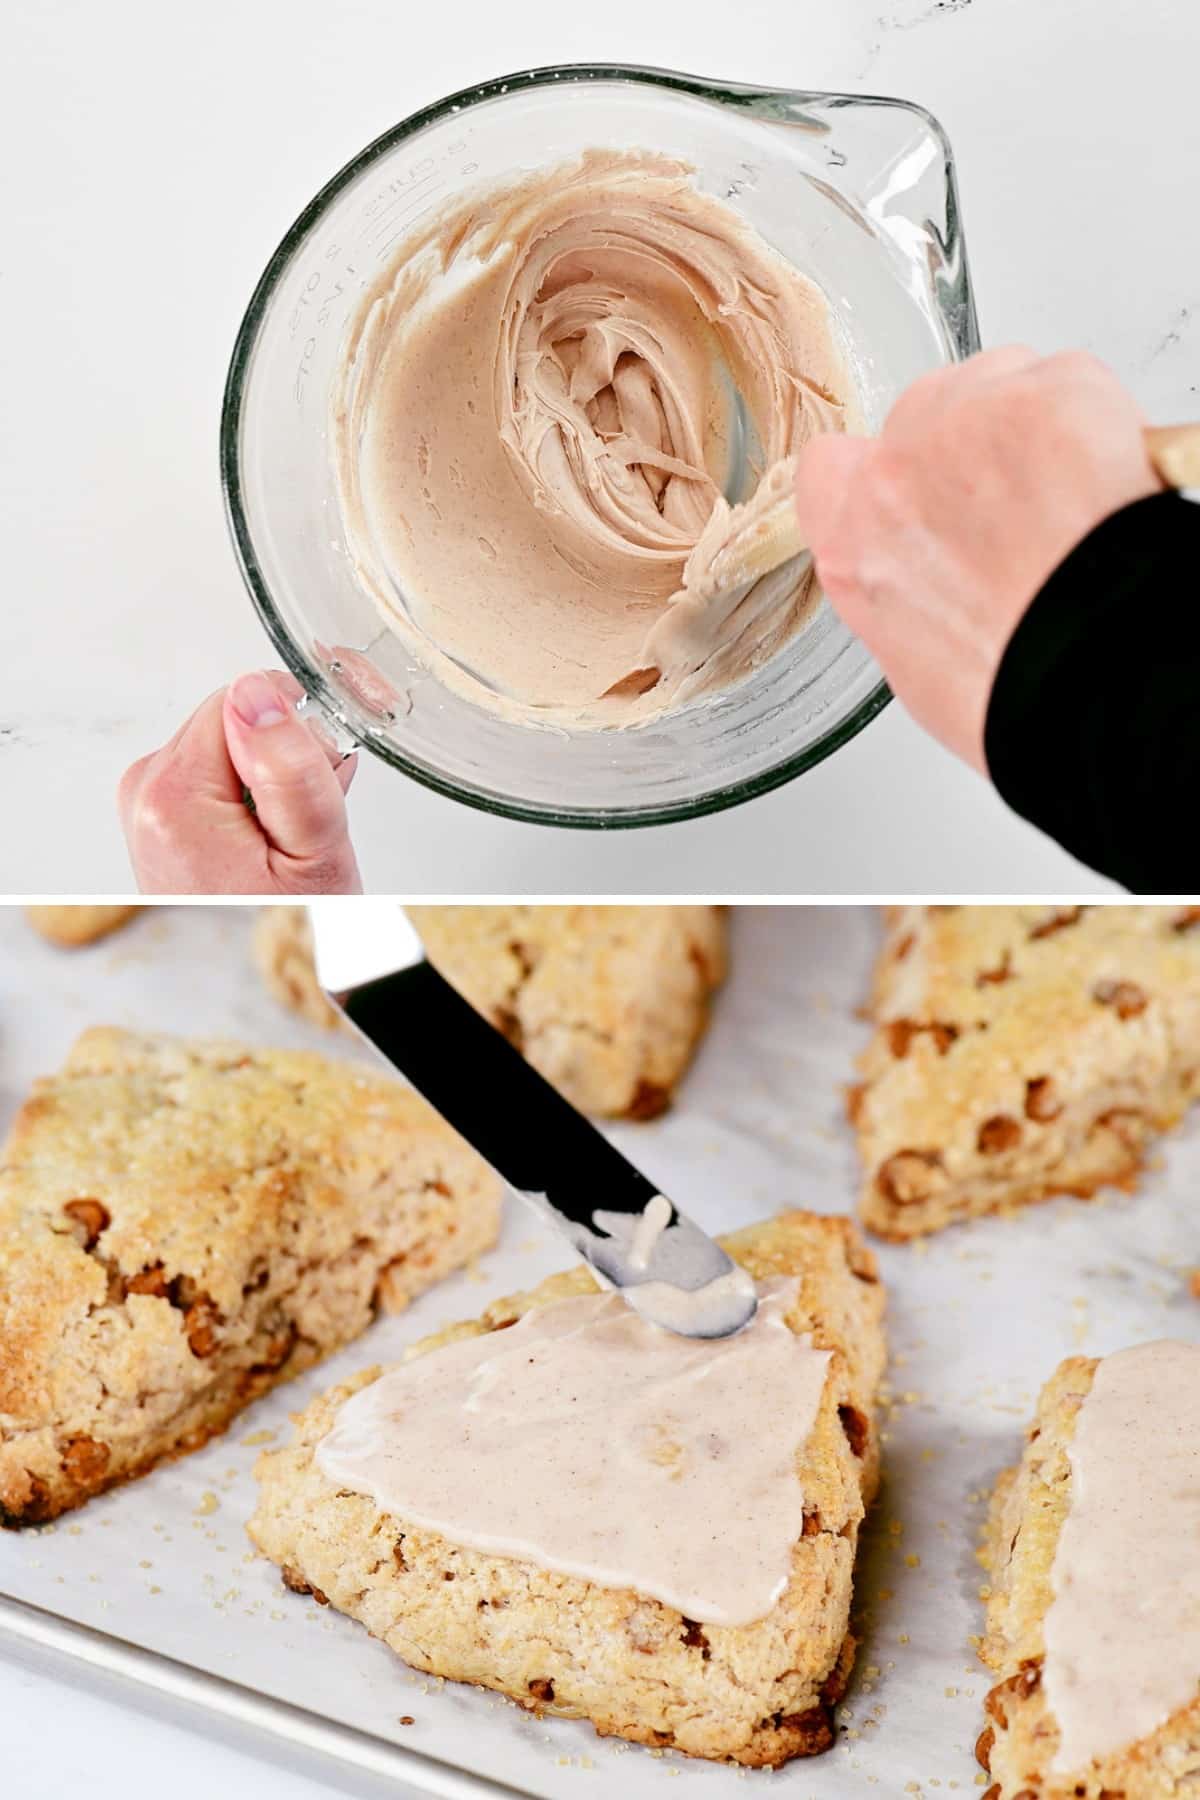 Mix cinnamon icing and spread over scones.